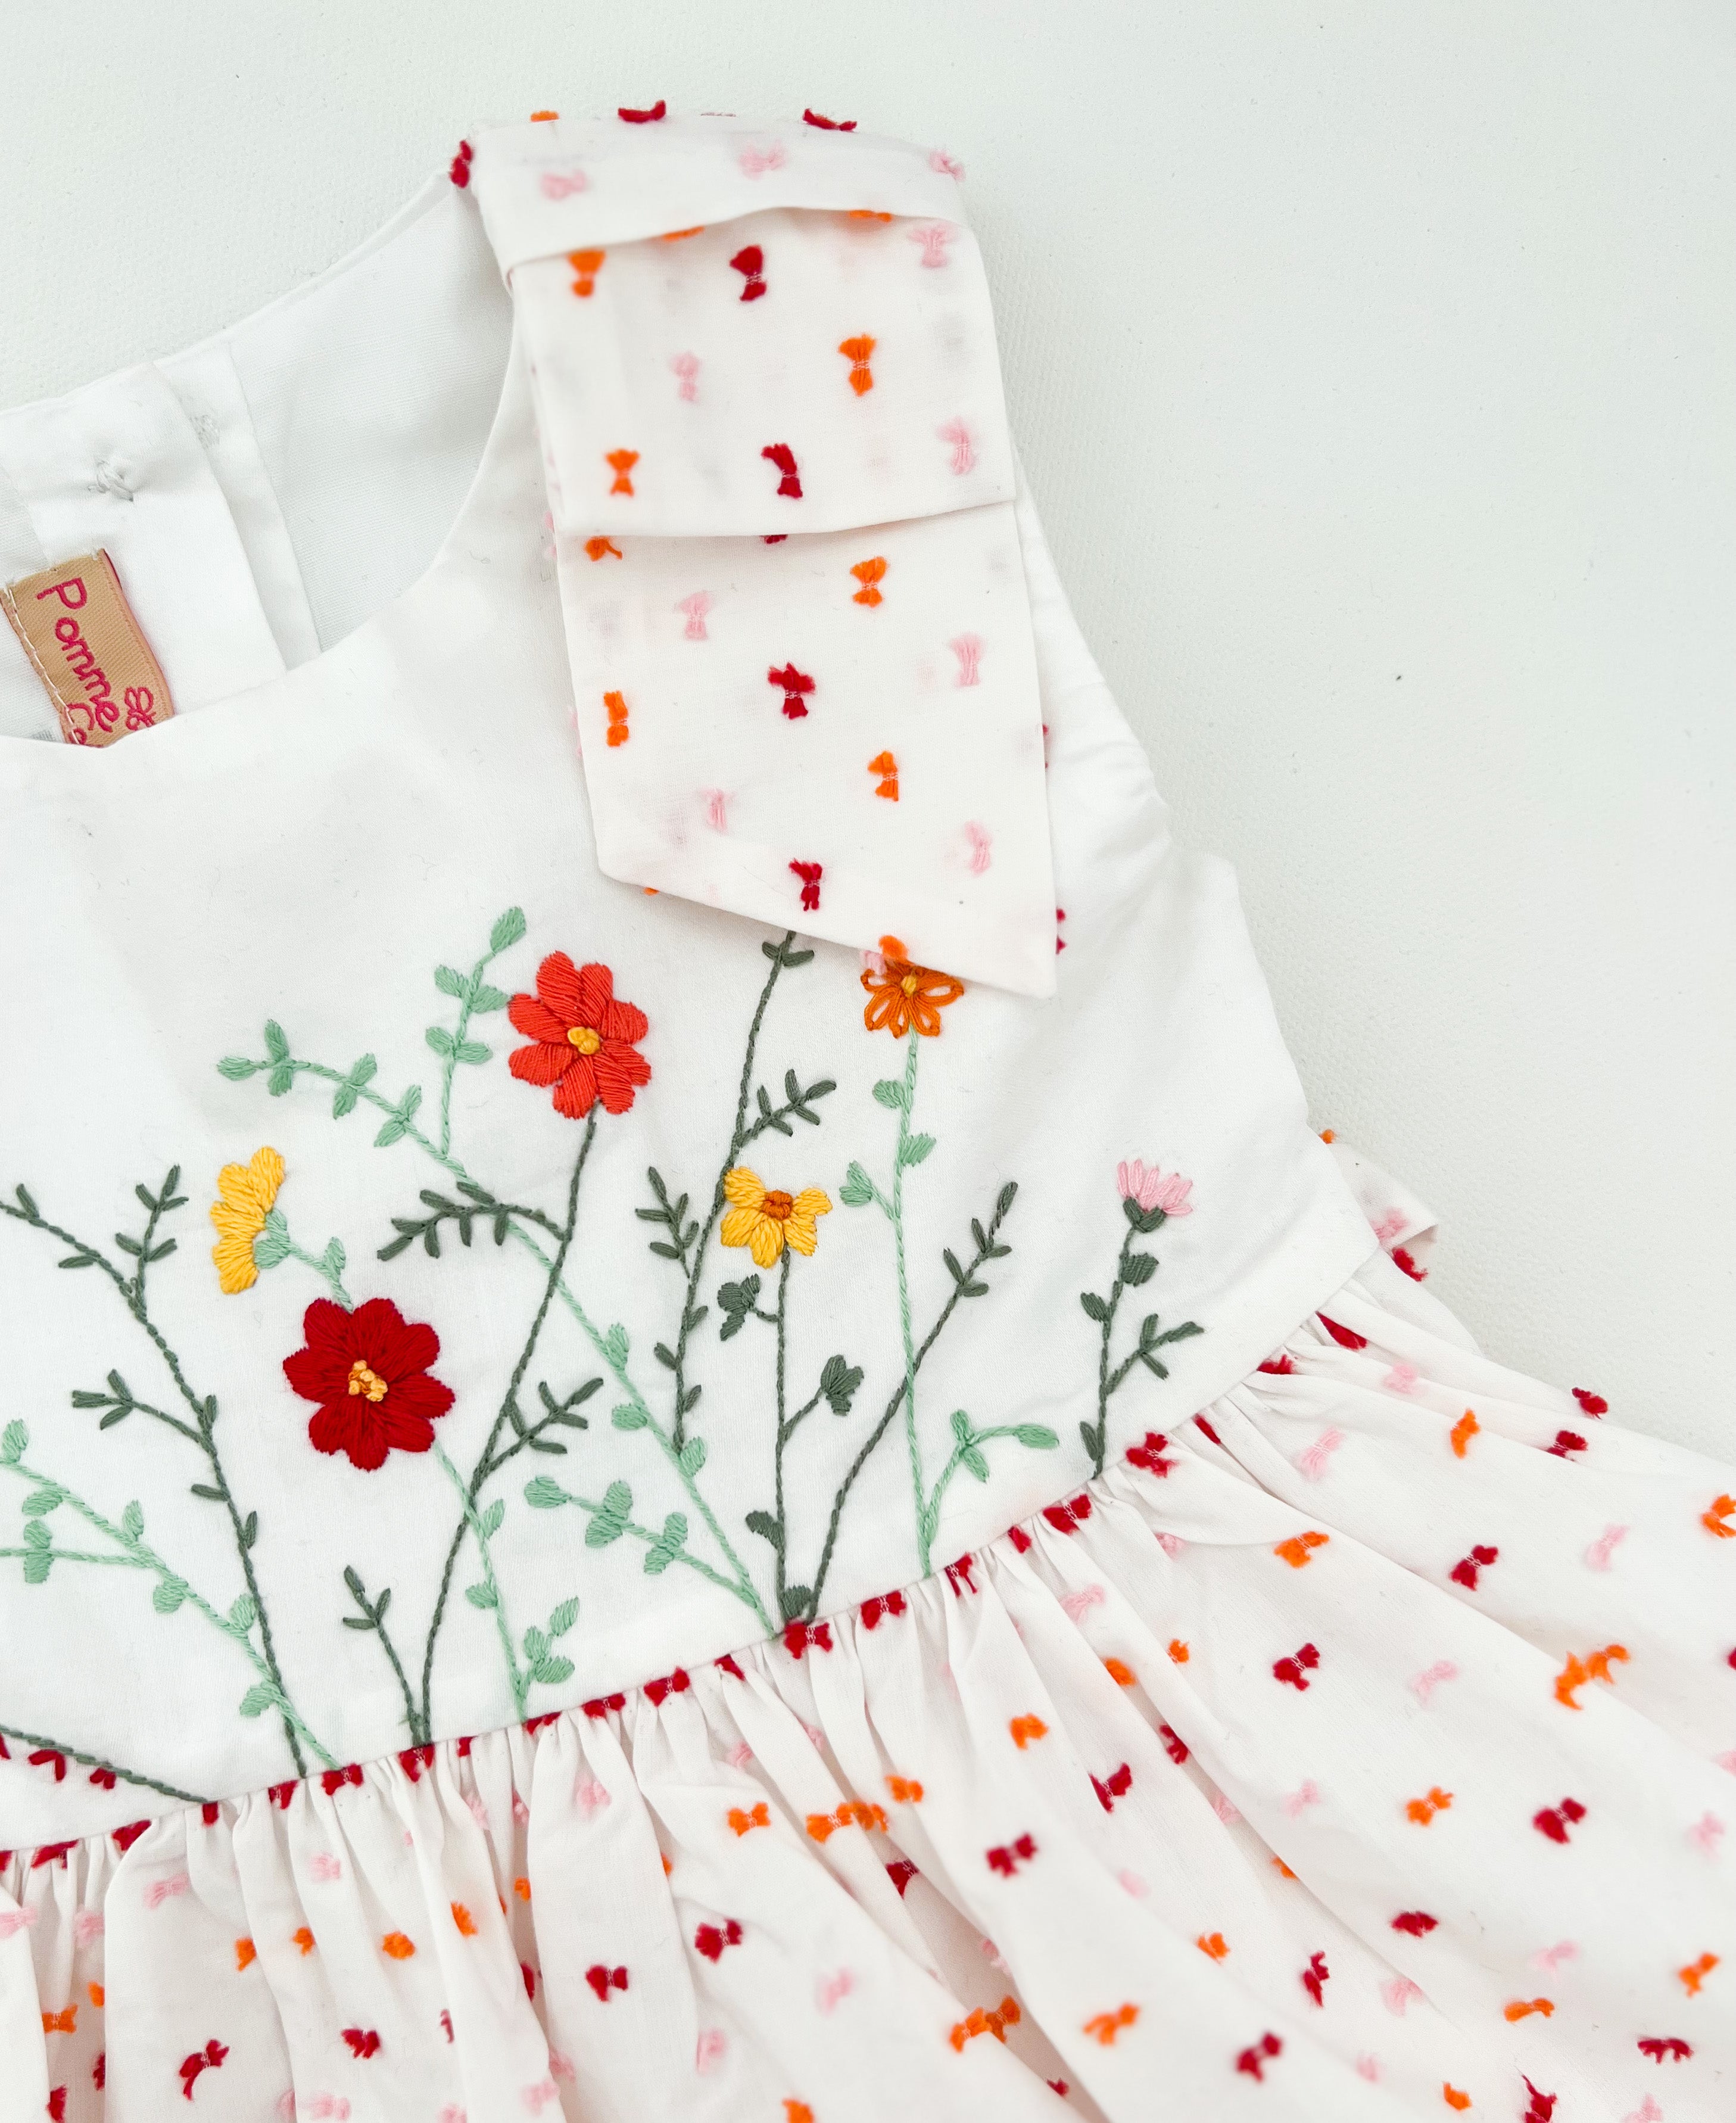 ** SOLD OUT ** The hand embroidered ALMA dress